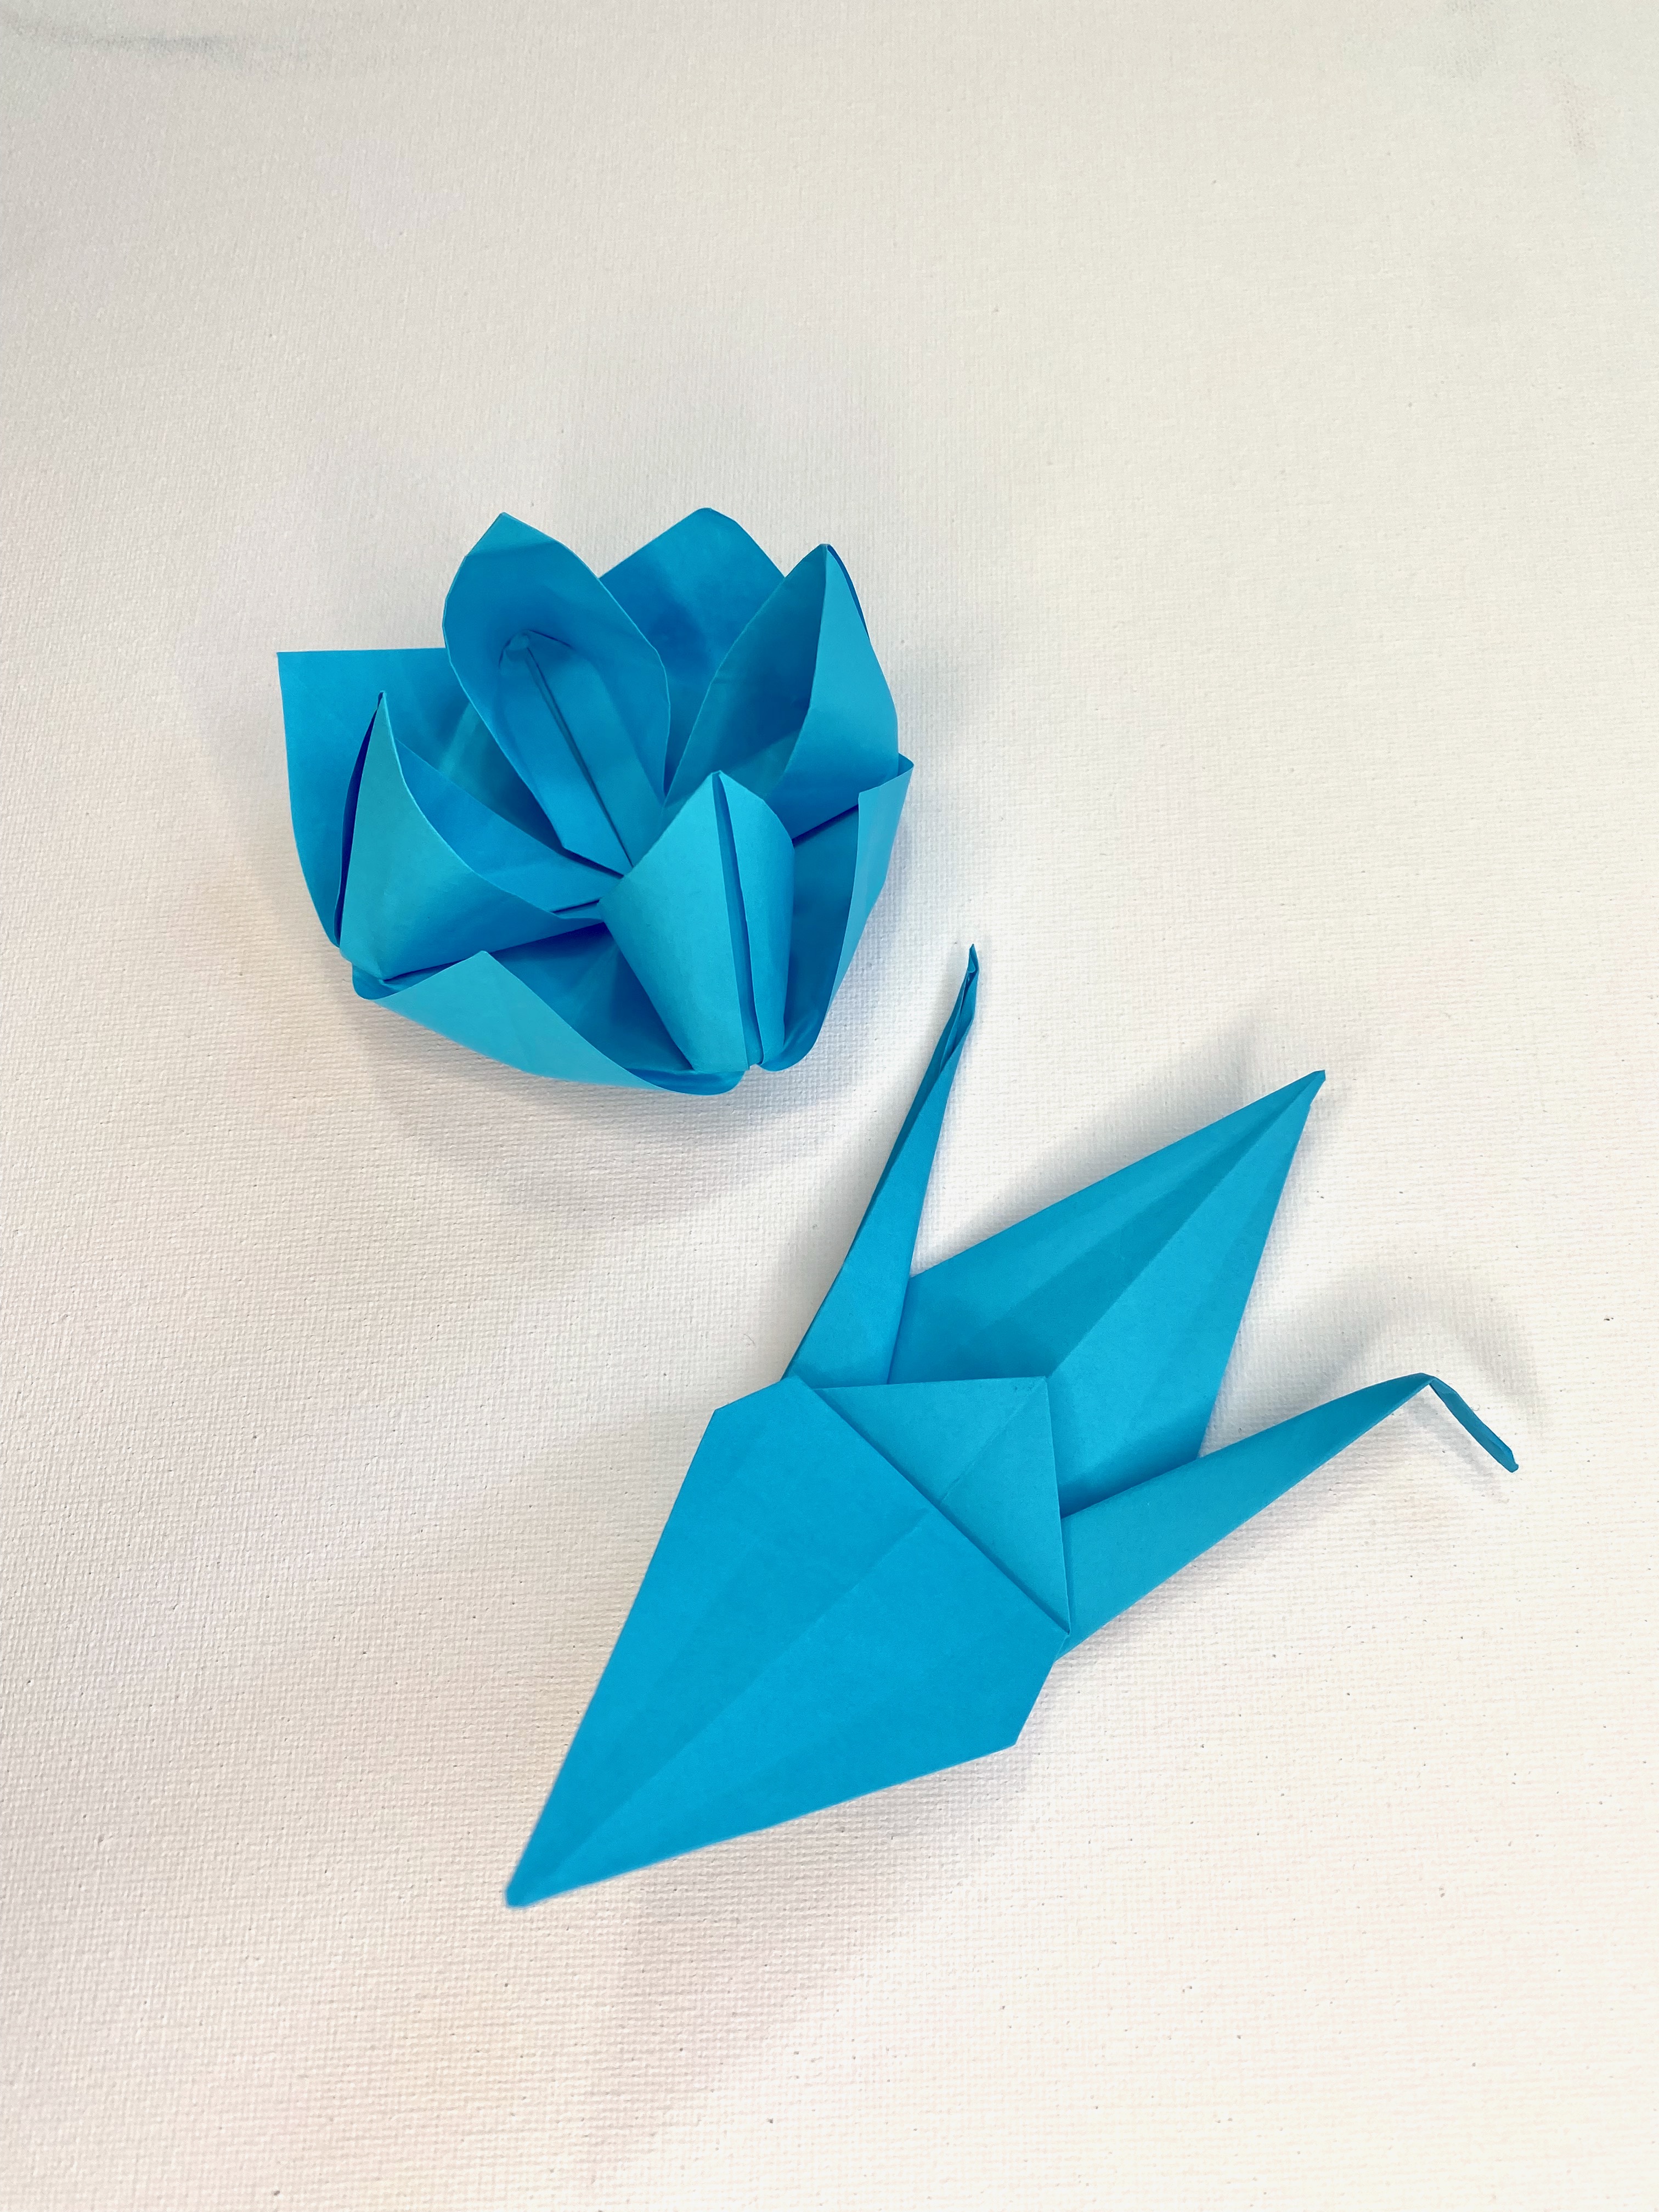 A Origami Nite Crane  Lotus experience project by Yaymaker